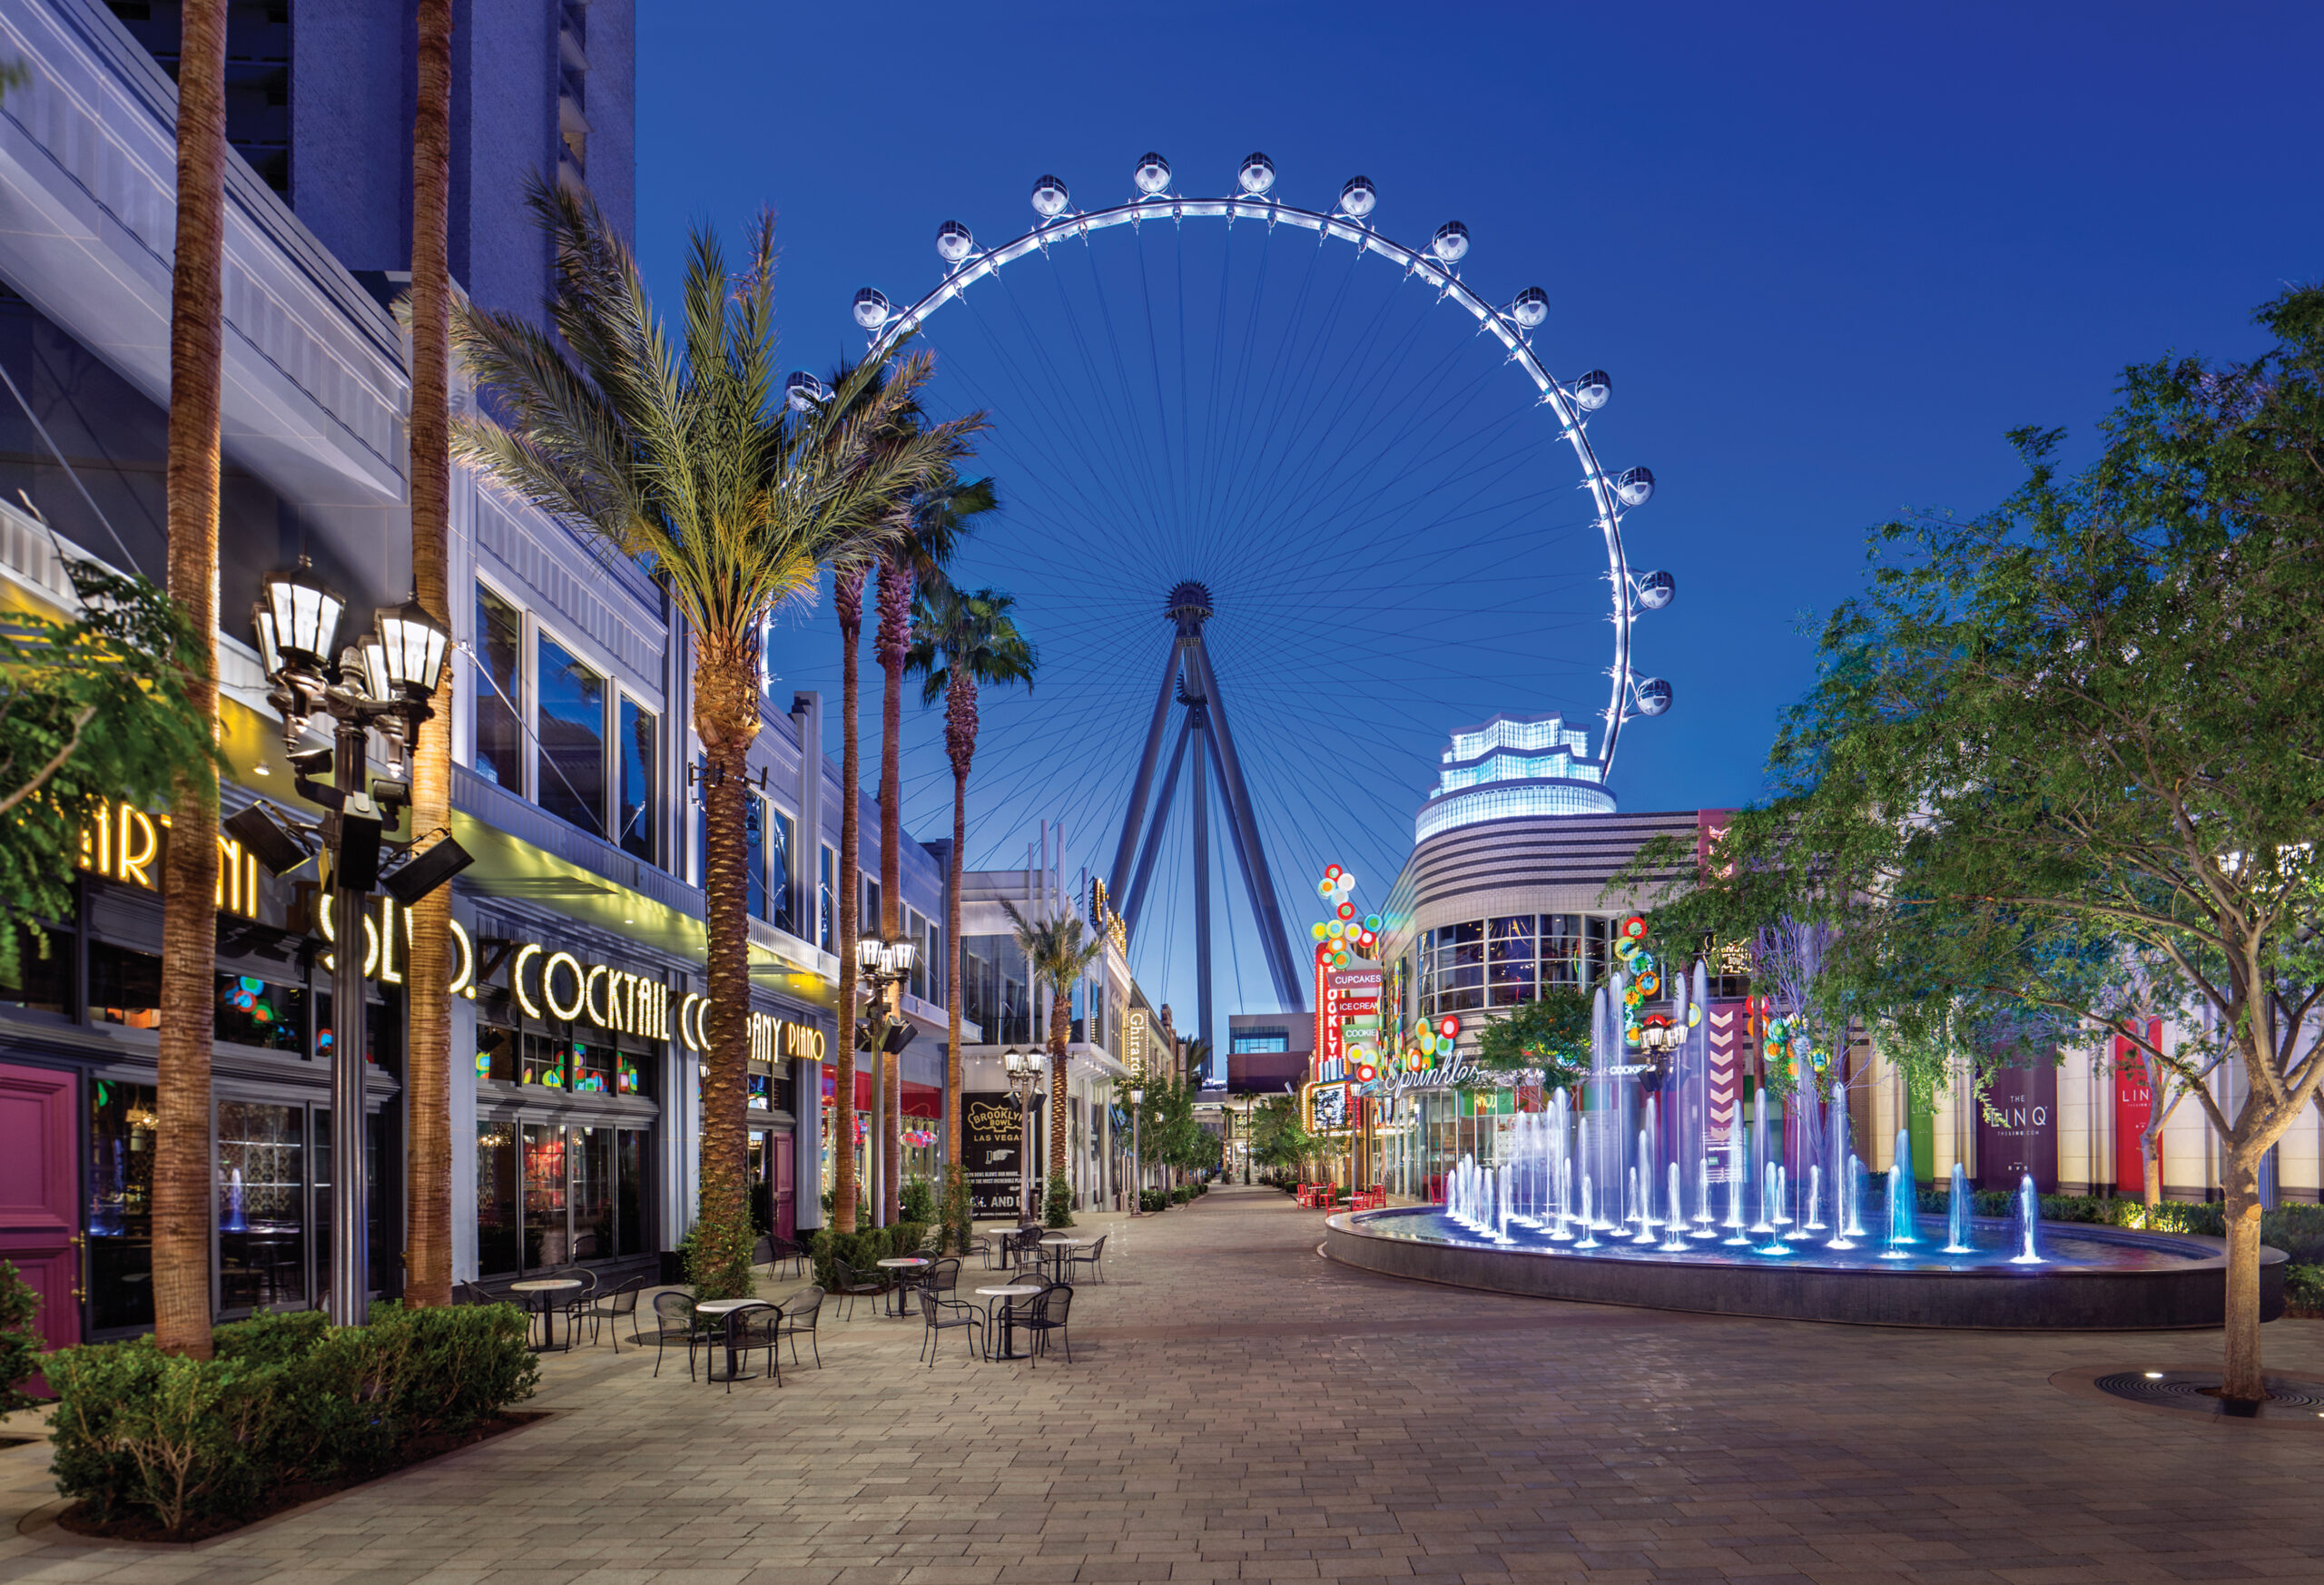 The High Roller dazzles the skyline illuminated by 2,000 LED lights.